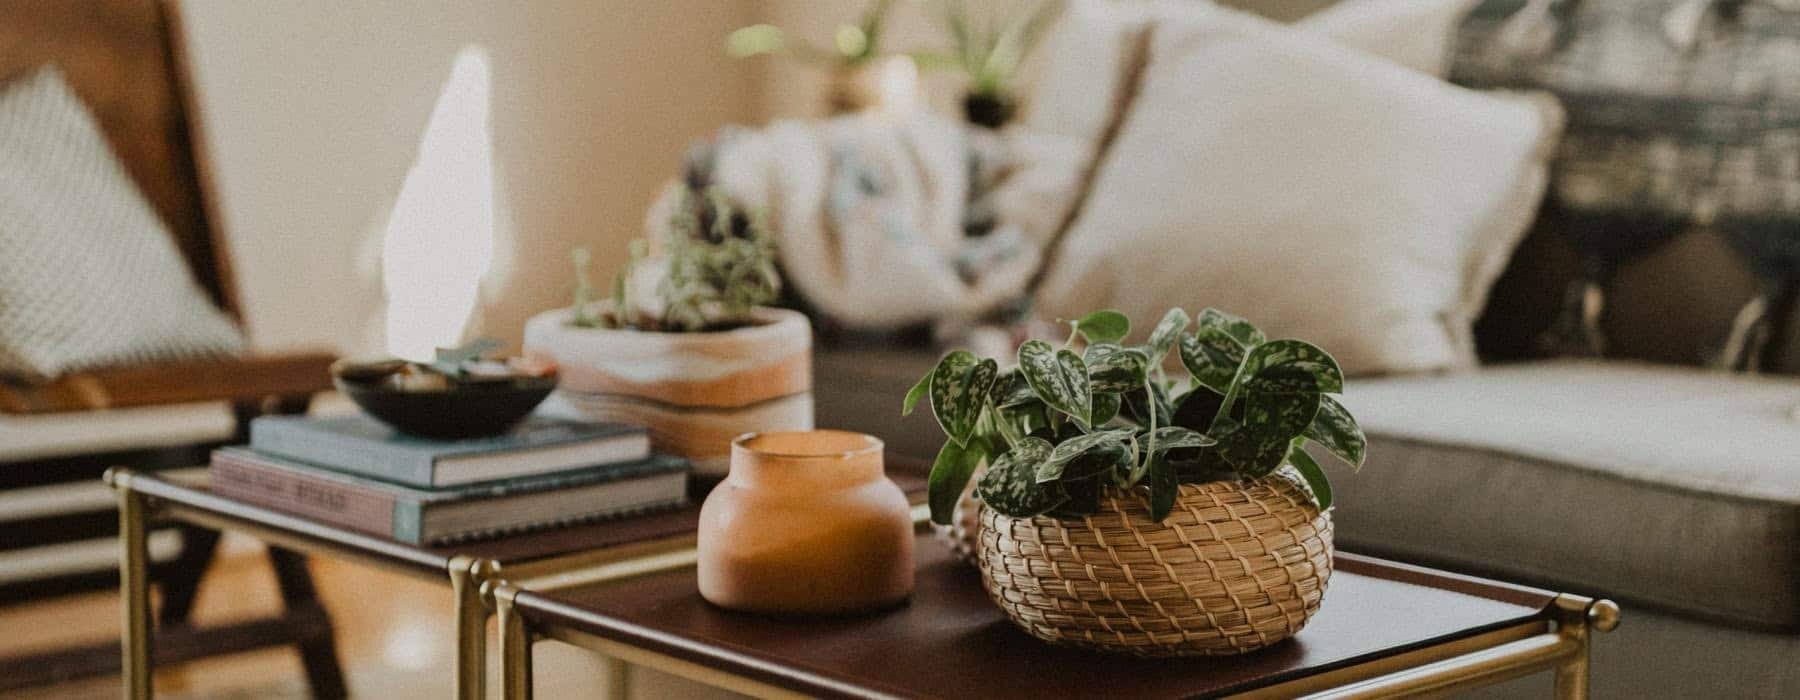 a table with a glass coffee table and a couch with a basket of plants